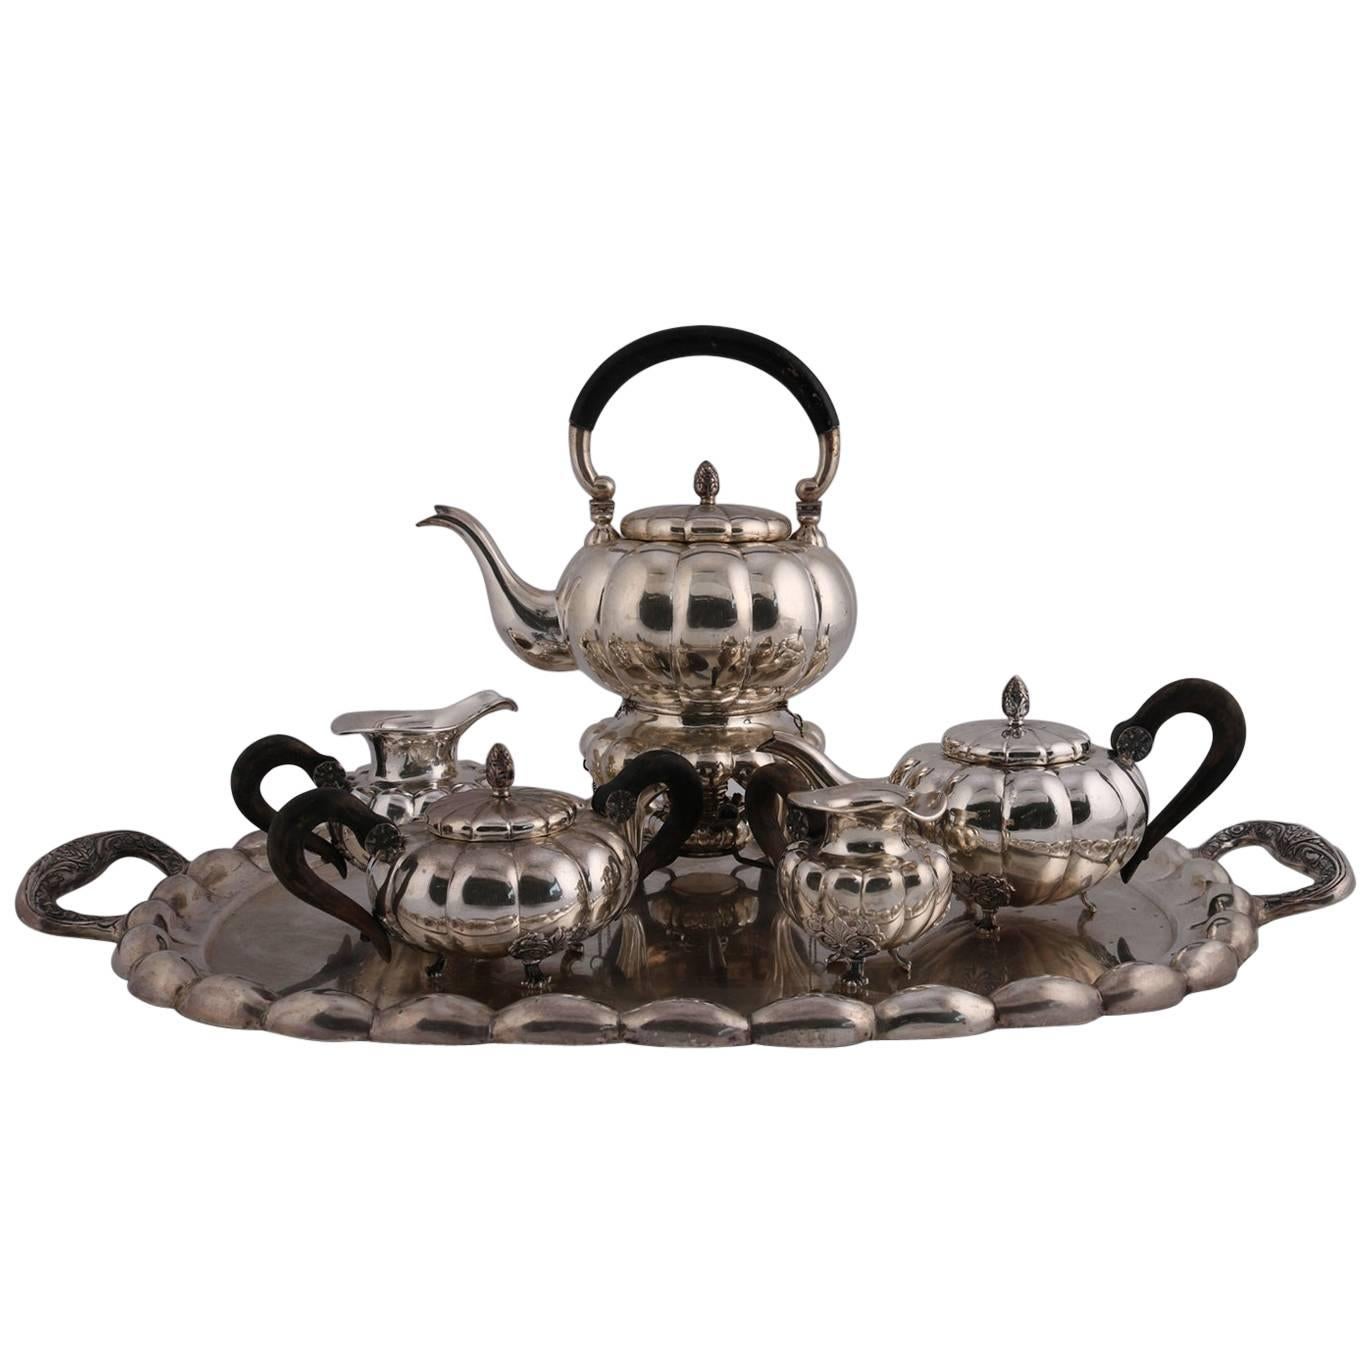 Large Six-Piece French Antique French .800 Silver Gadroon Tea Set, circa 1900